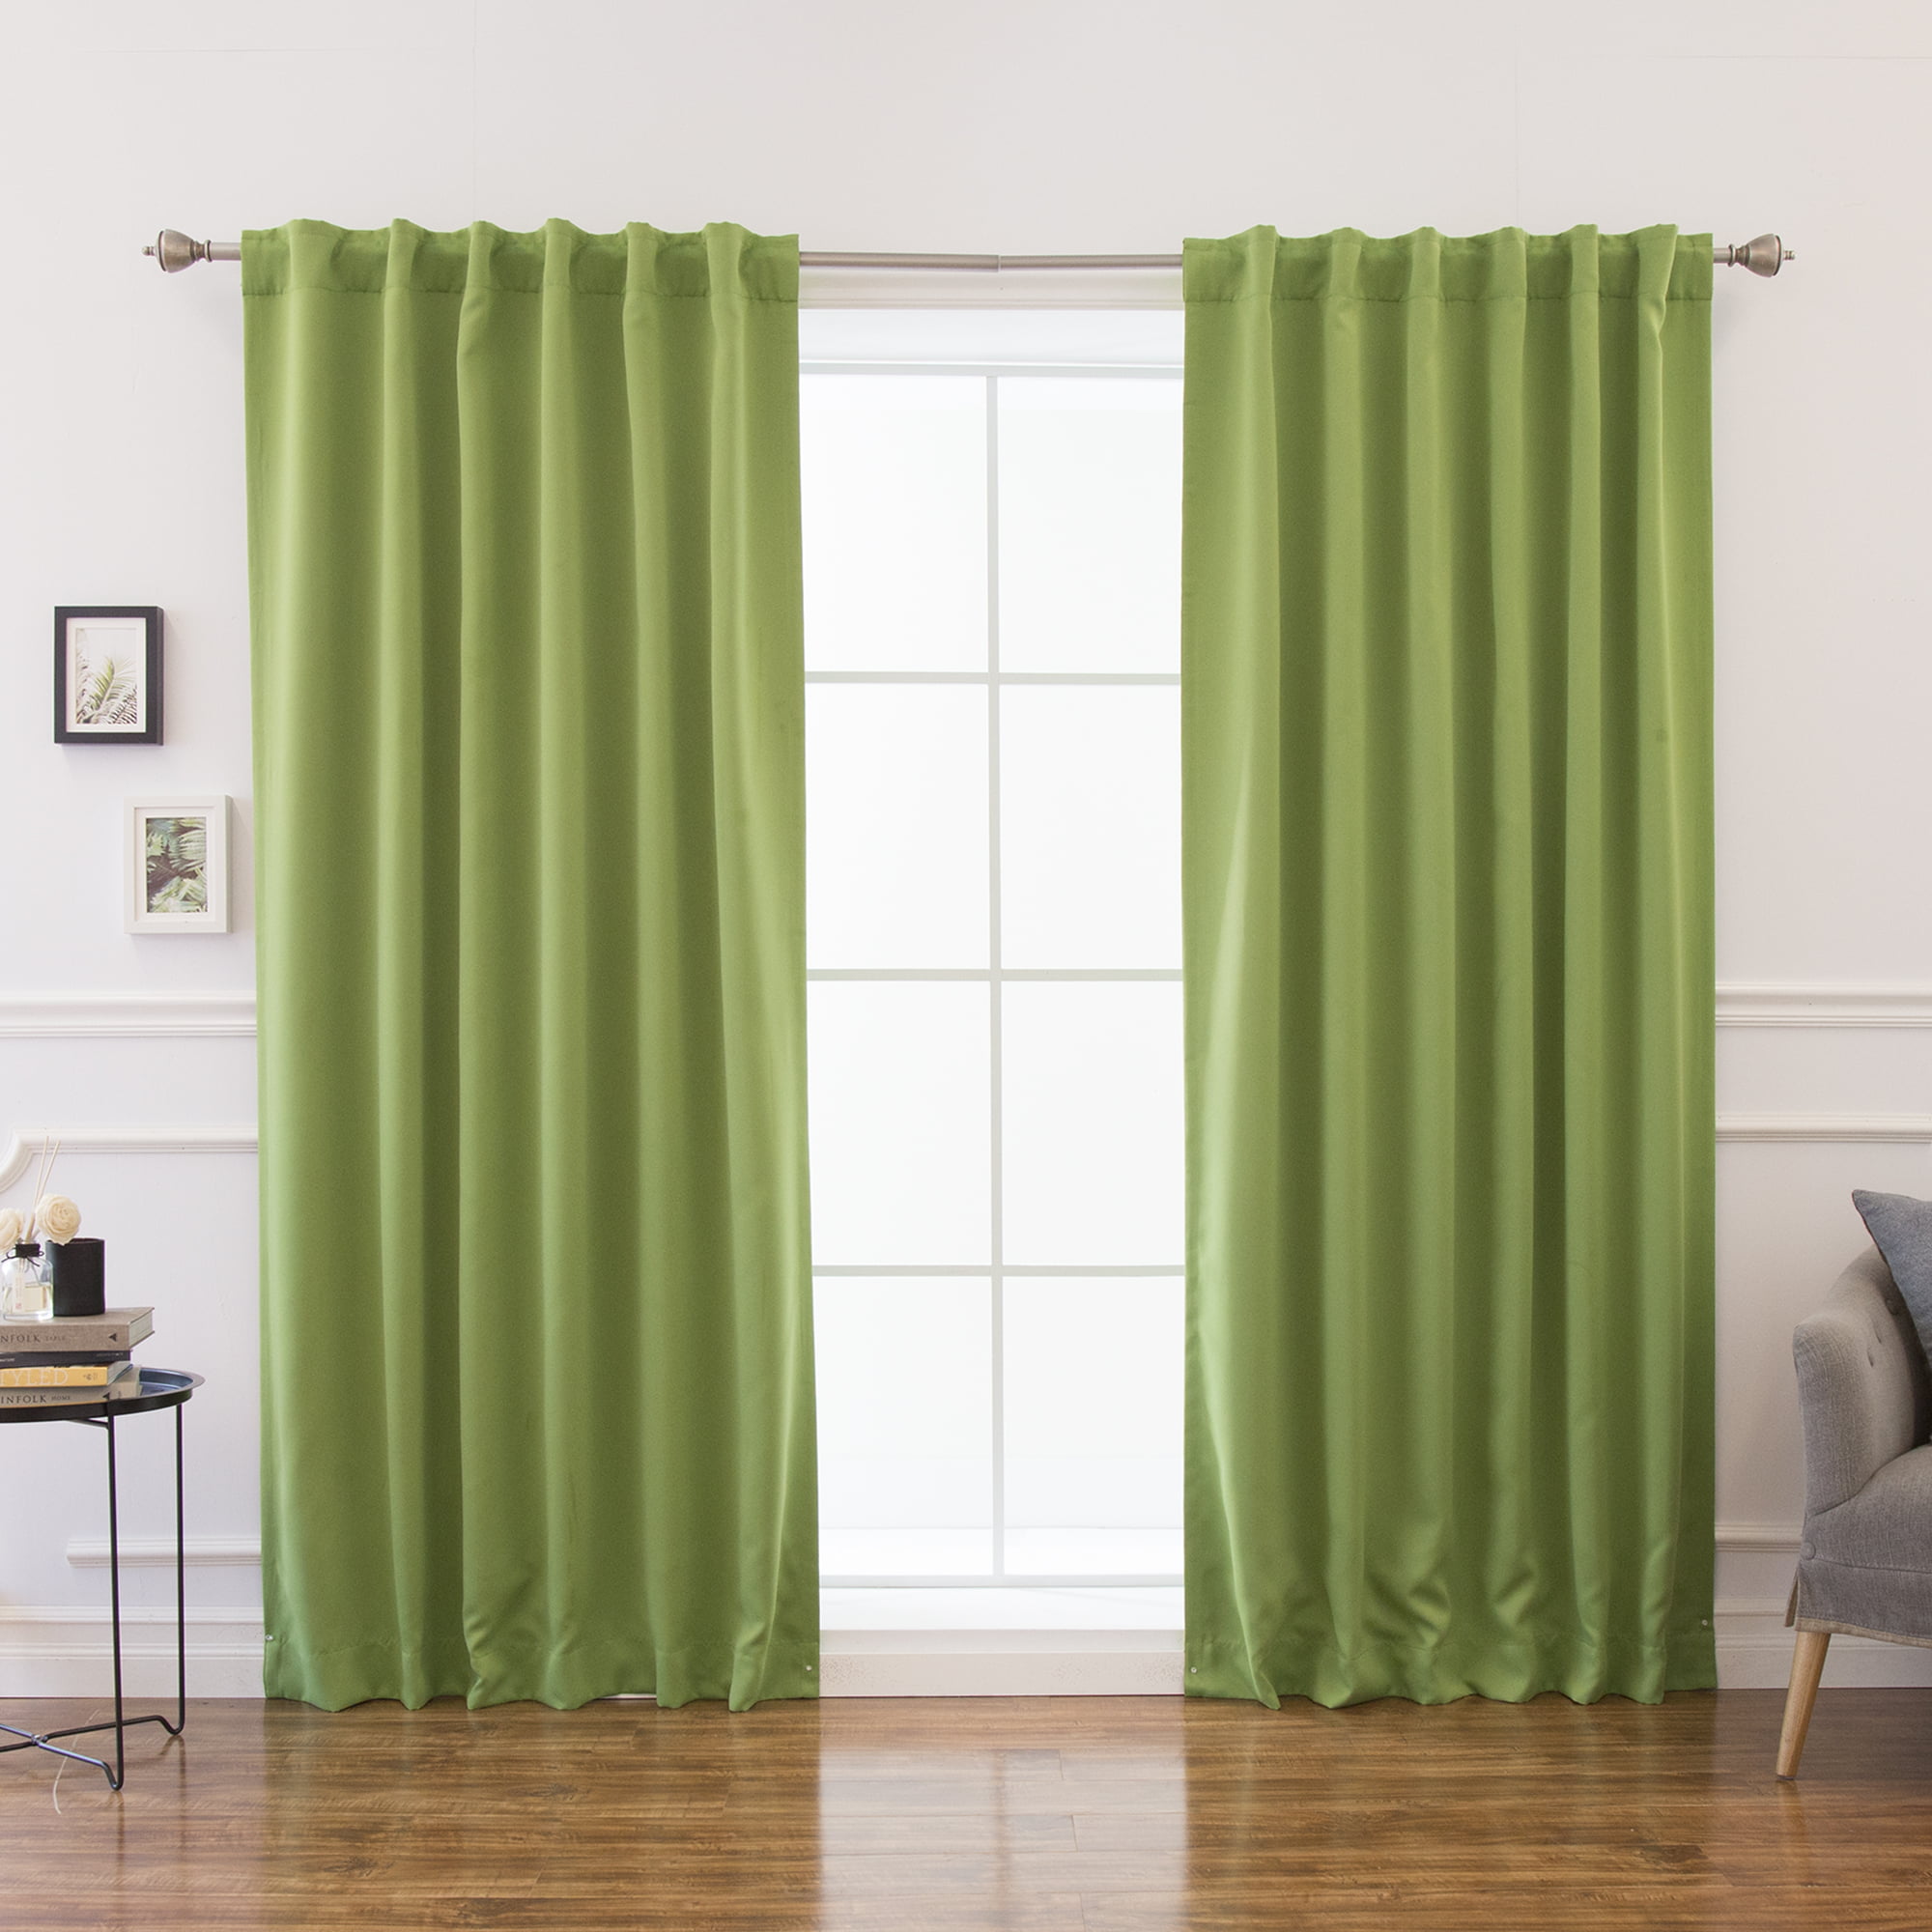 Quality Home Basic Thermal Blackout Curtains - Back Tab/Rod Pocket